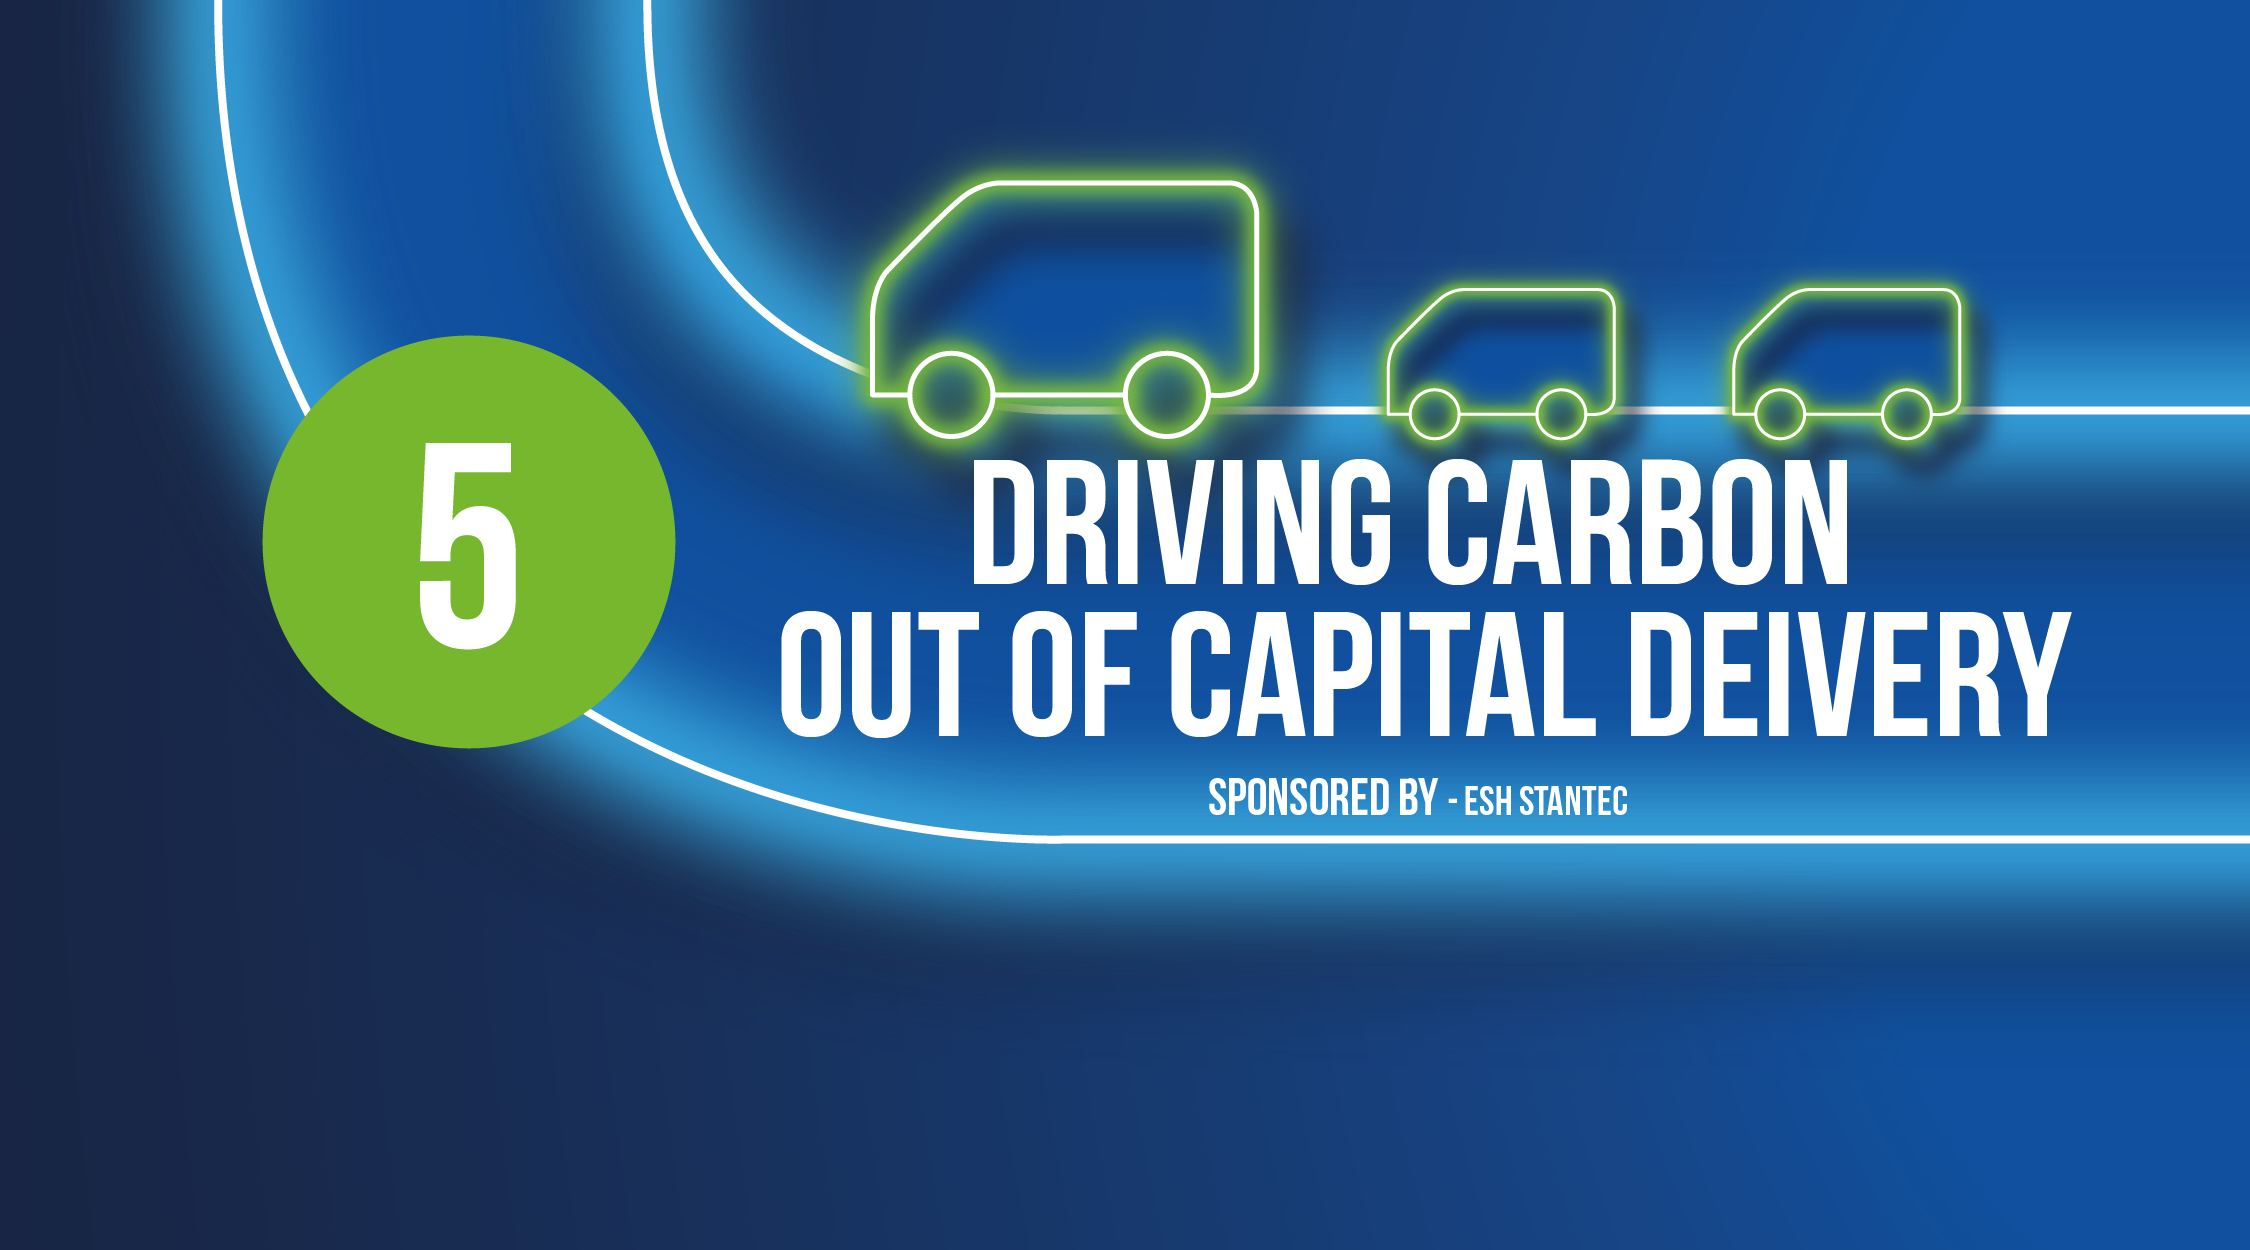 Driving carbon out of capital delivery